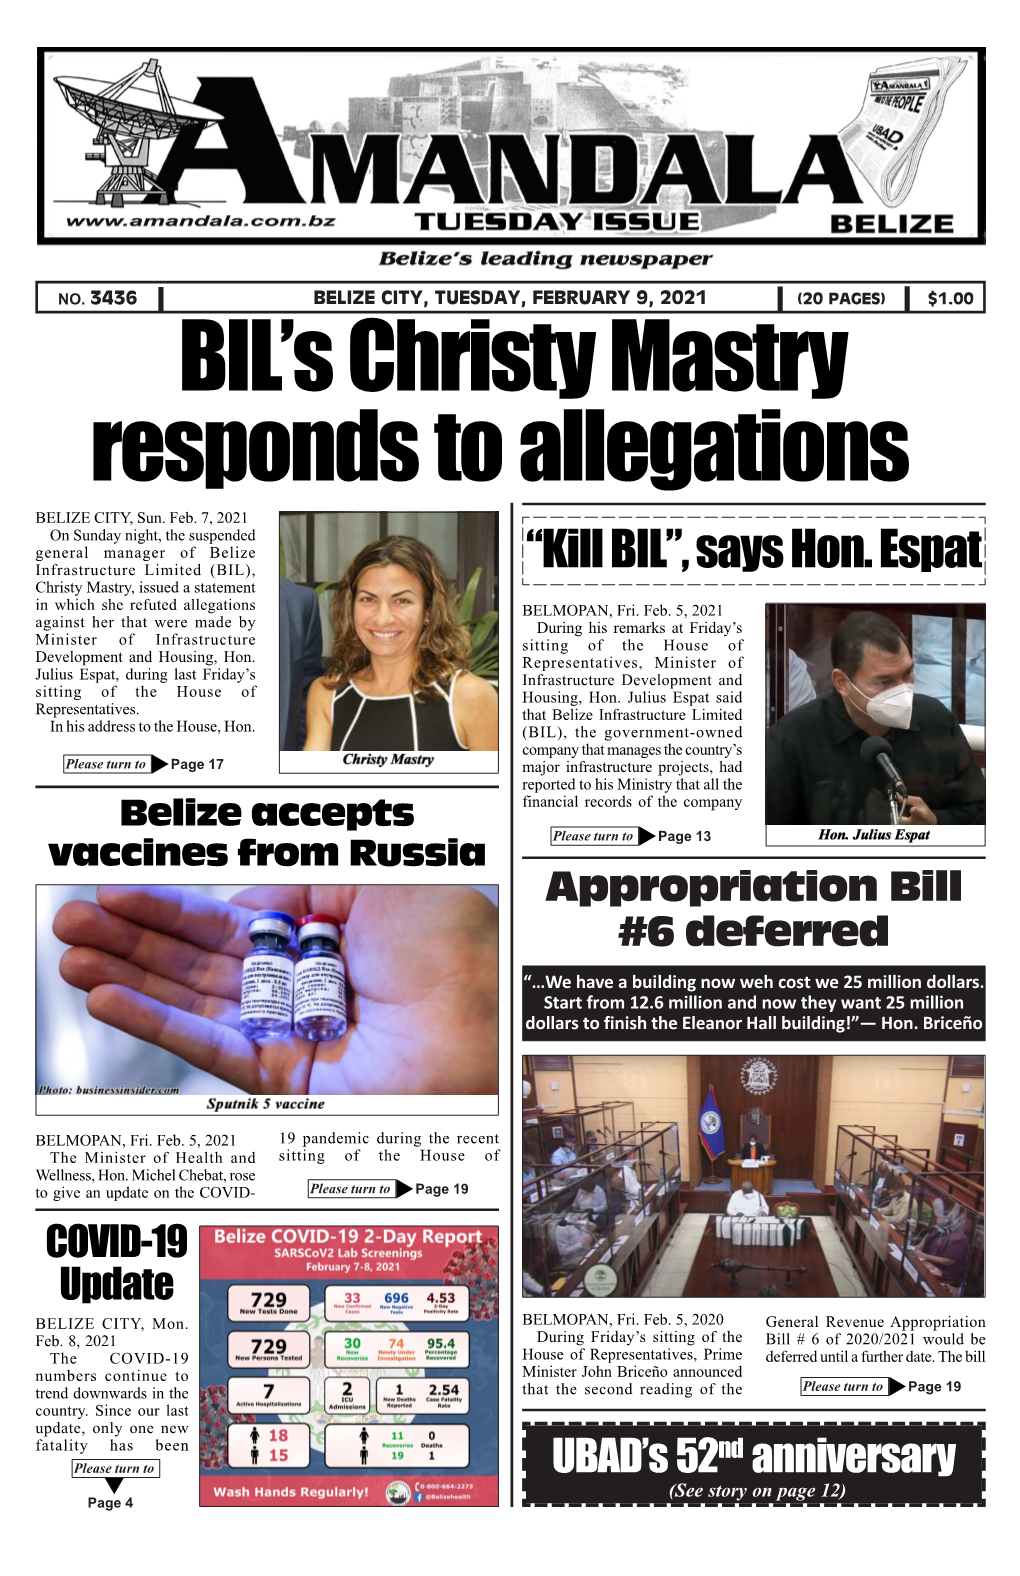 “Kill BIL”, Says Hon. Espat Christy Mastry, Issued a Statement in Which She Refuted Allegations BELMOPAN, Fri